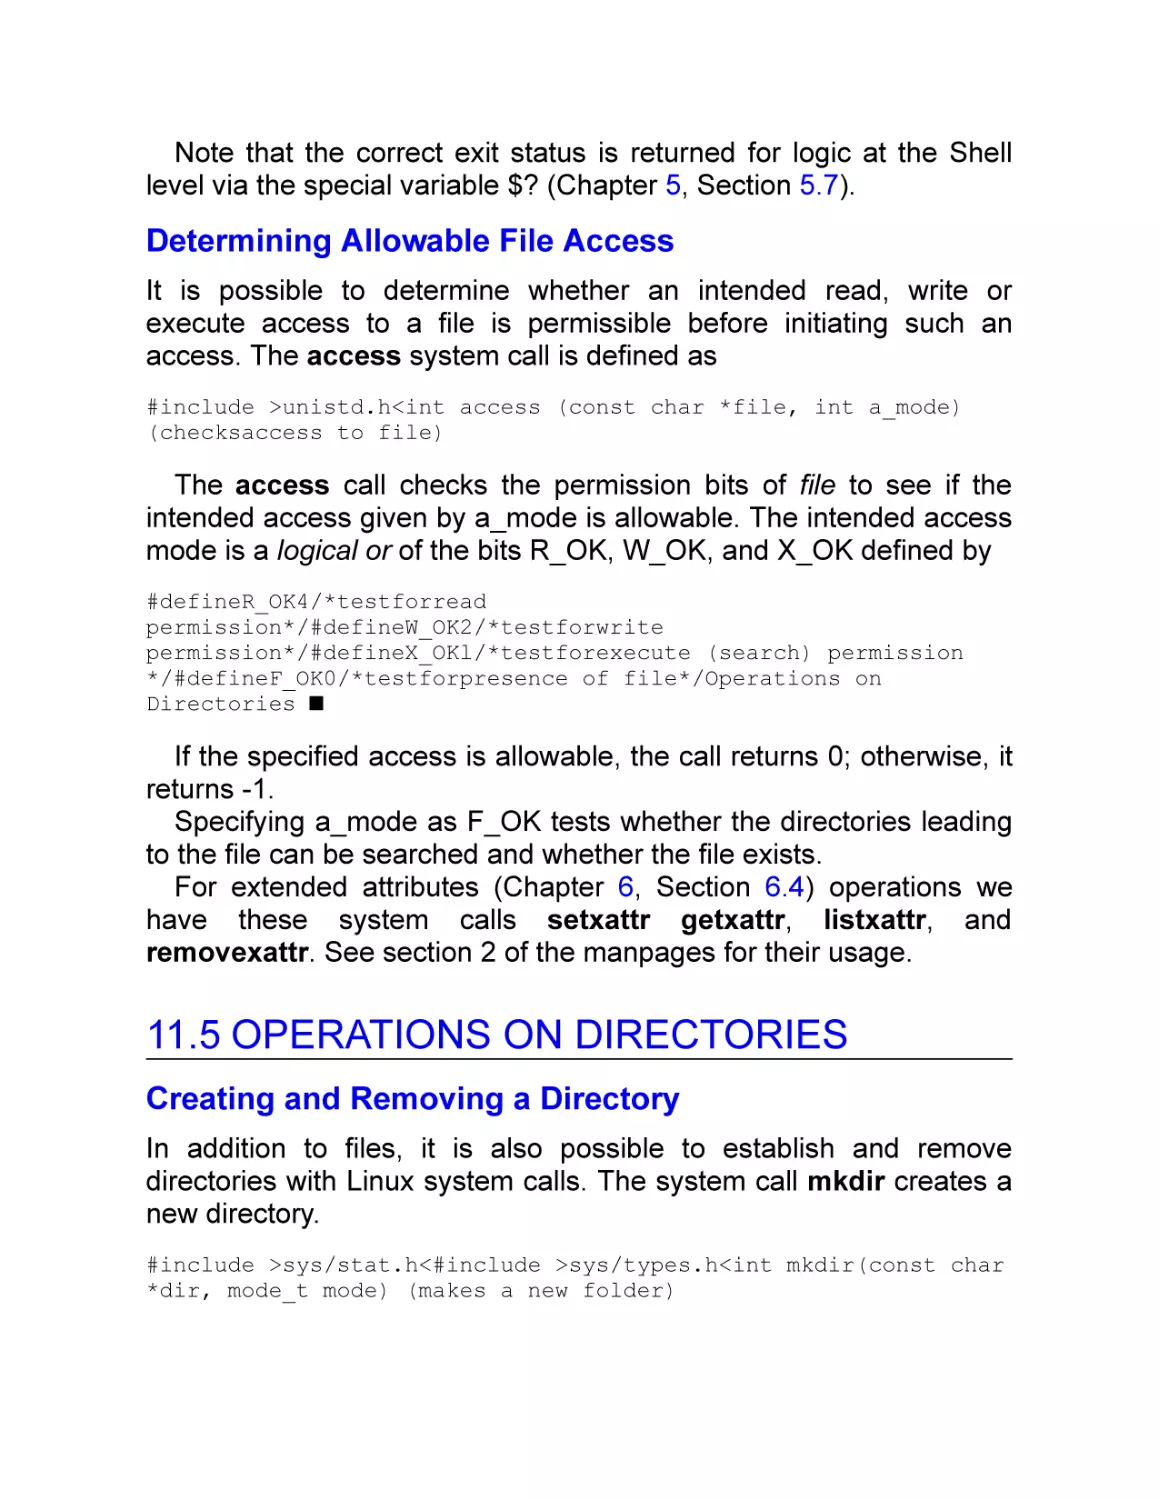 Determining Allowable File Access
11.5 Operations on Directories
Creating and Removing a Directory